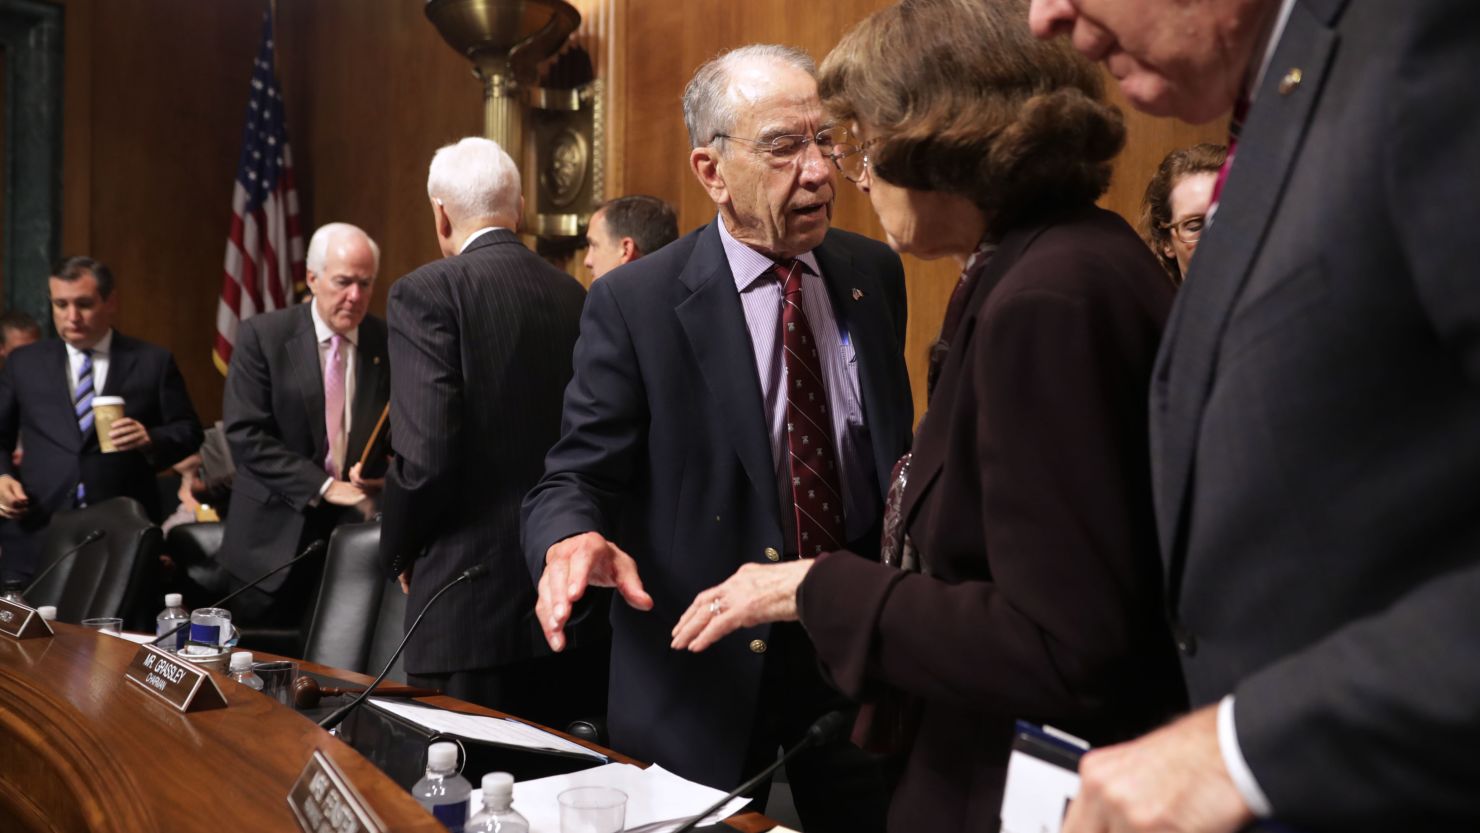 Senate Judiciary Committee Chairman Charles Grassley (R-IA) (C) talks with ranking member Sen. Dianne Feinstein after the committee voted out Supreme Court nominee Judge Brett Kavanaugh at the conclusion of a mark-up hearing in the Dirksen Senate Office Building on Capitol Hill September 28, 2018 in Washington. 